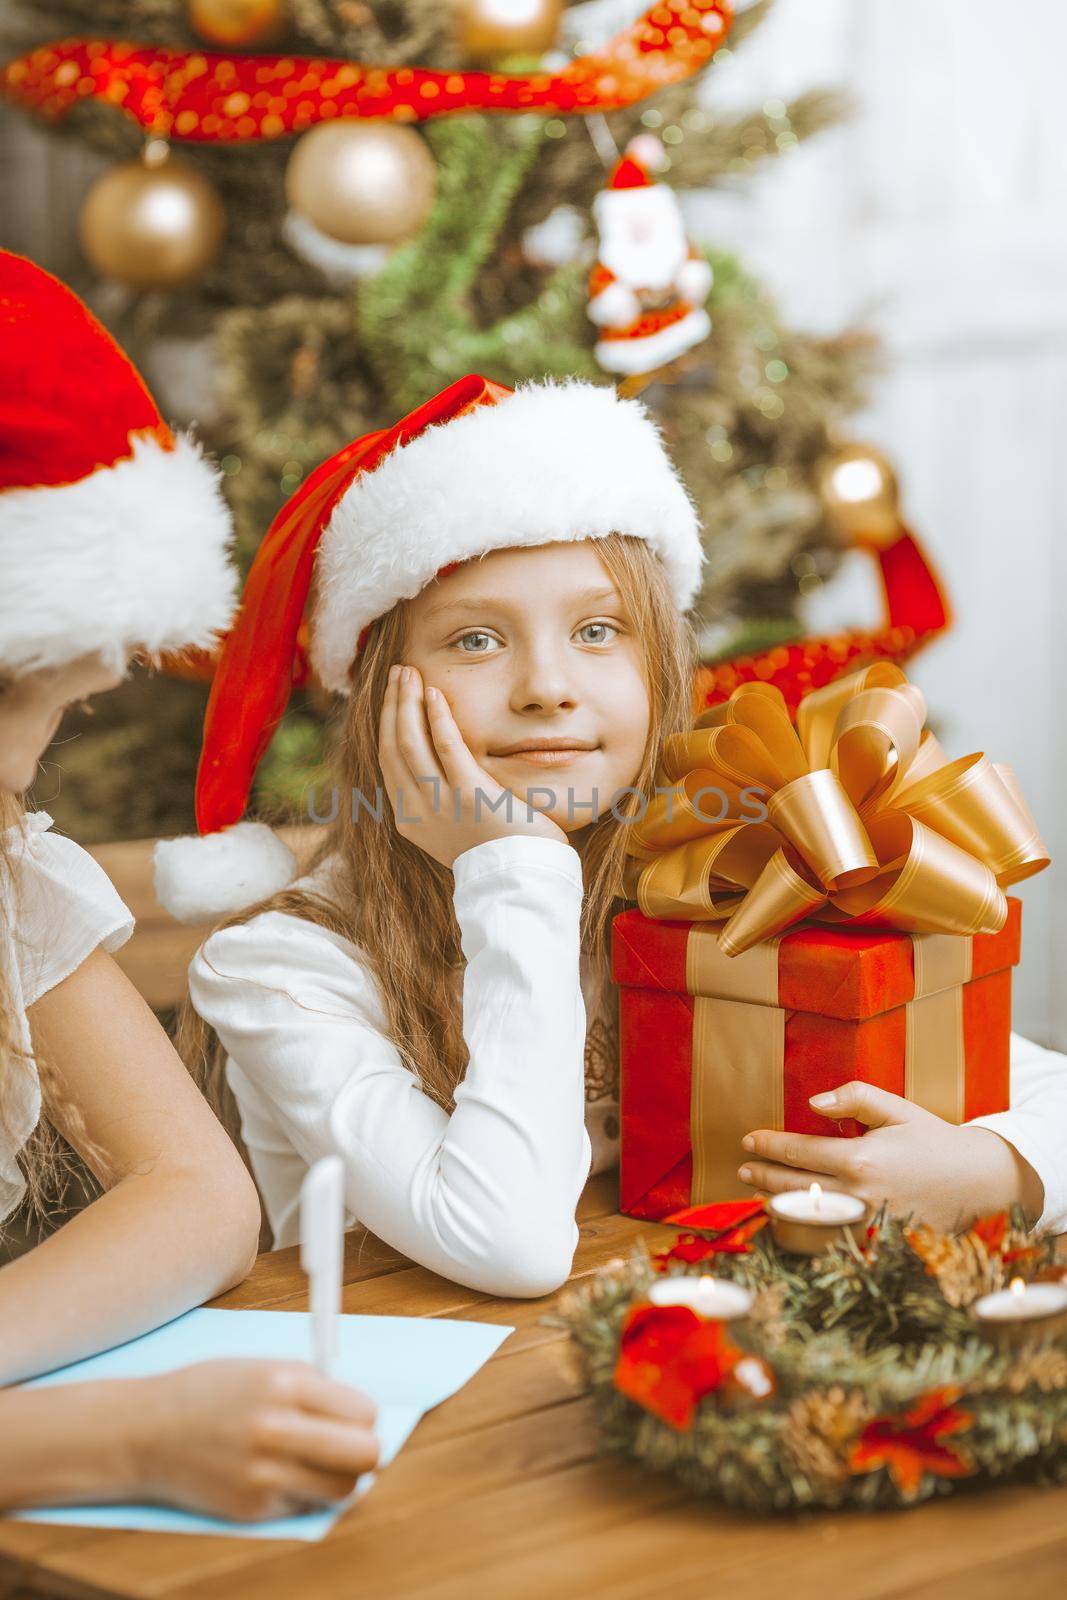 Little Sisters Girls in Christmas Hats Write a Letter to Santa Claus and Enjoy Christmas Eve. High quality photo